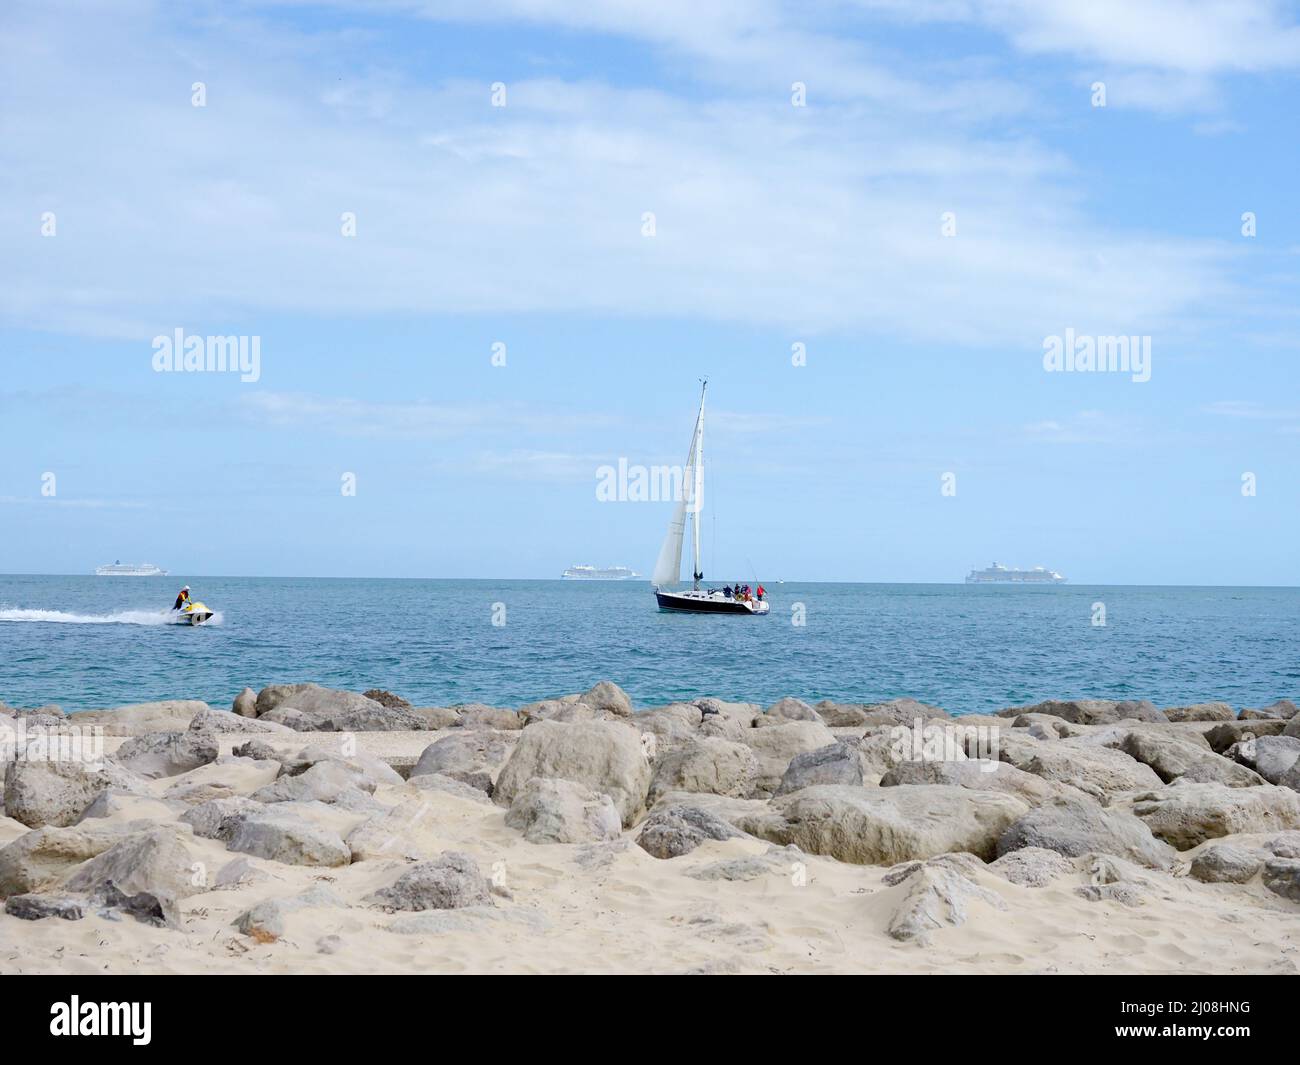 A sailing yacht passing close to the shore with three anchored cruise liners in the distance and a jet ski passing by Stock Photo